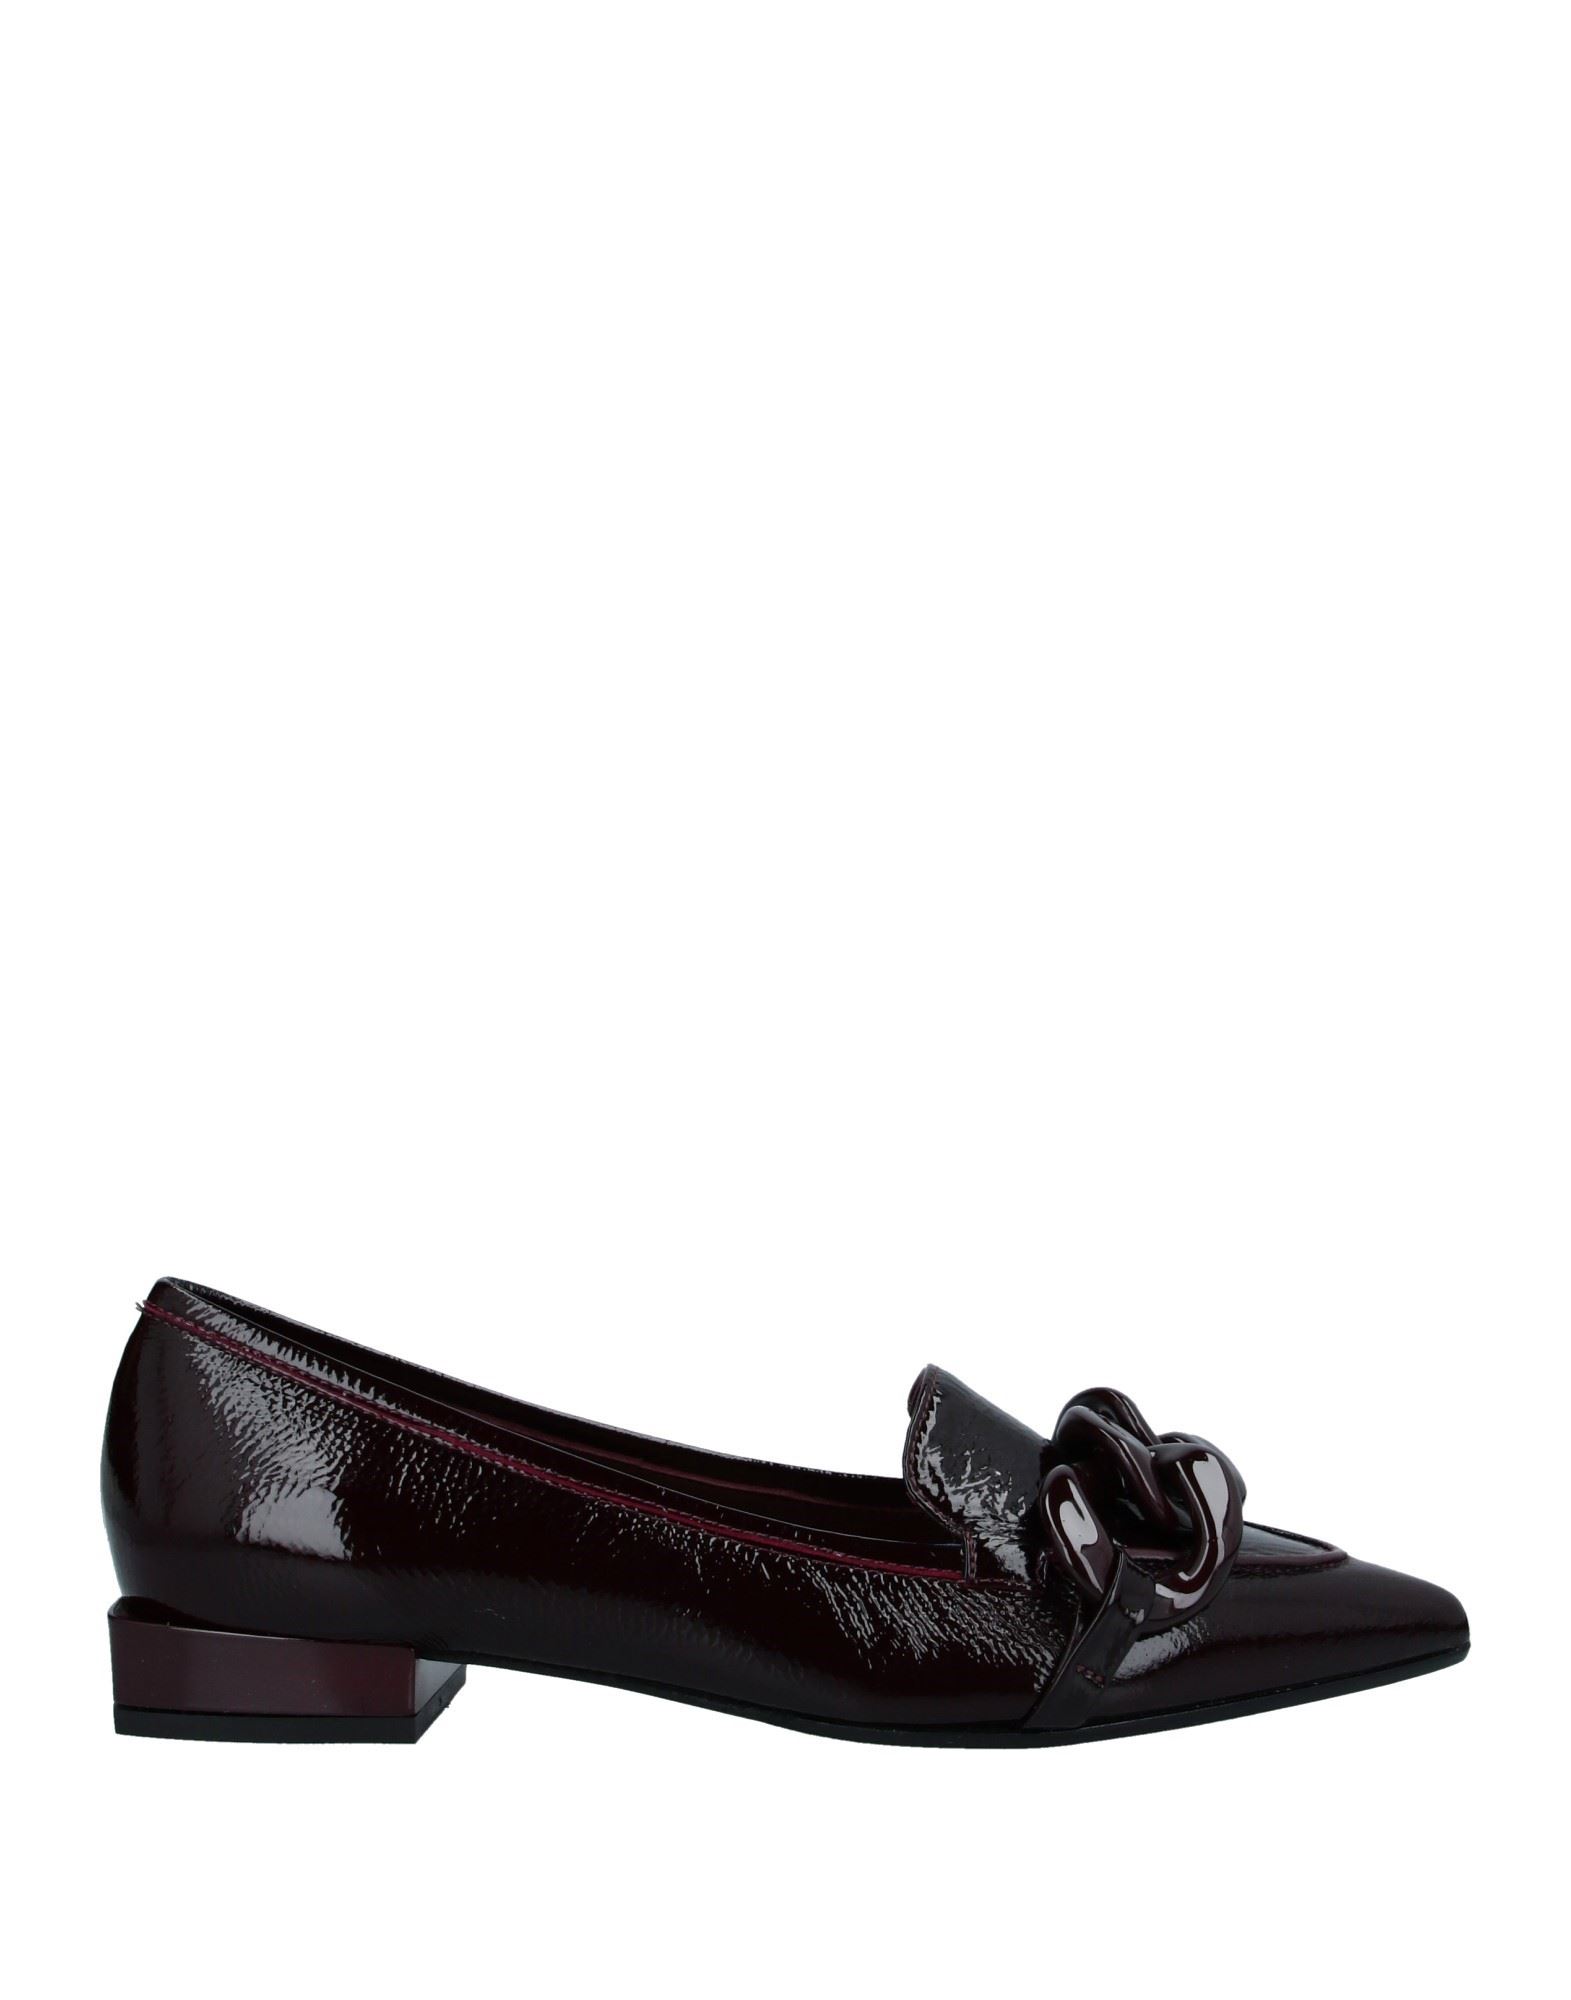 Mirtilla Loafers In Burgundy